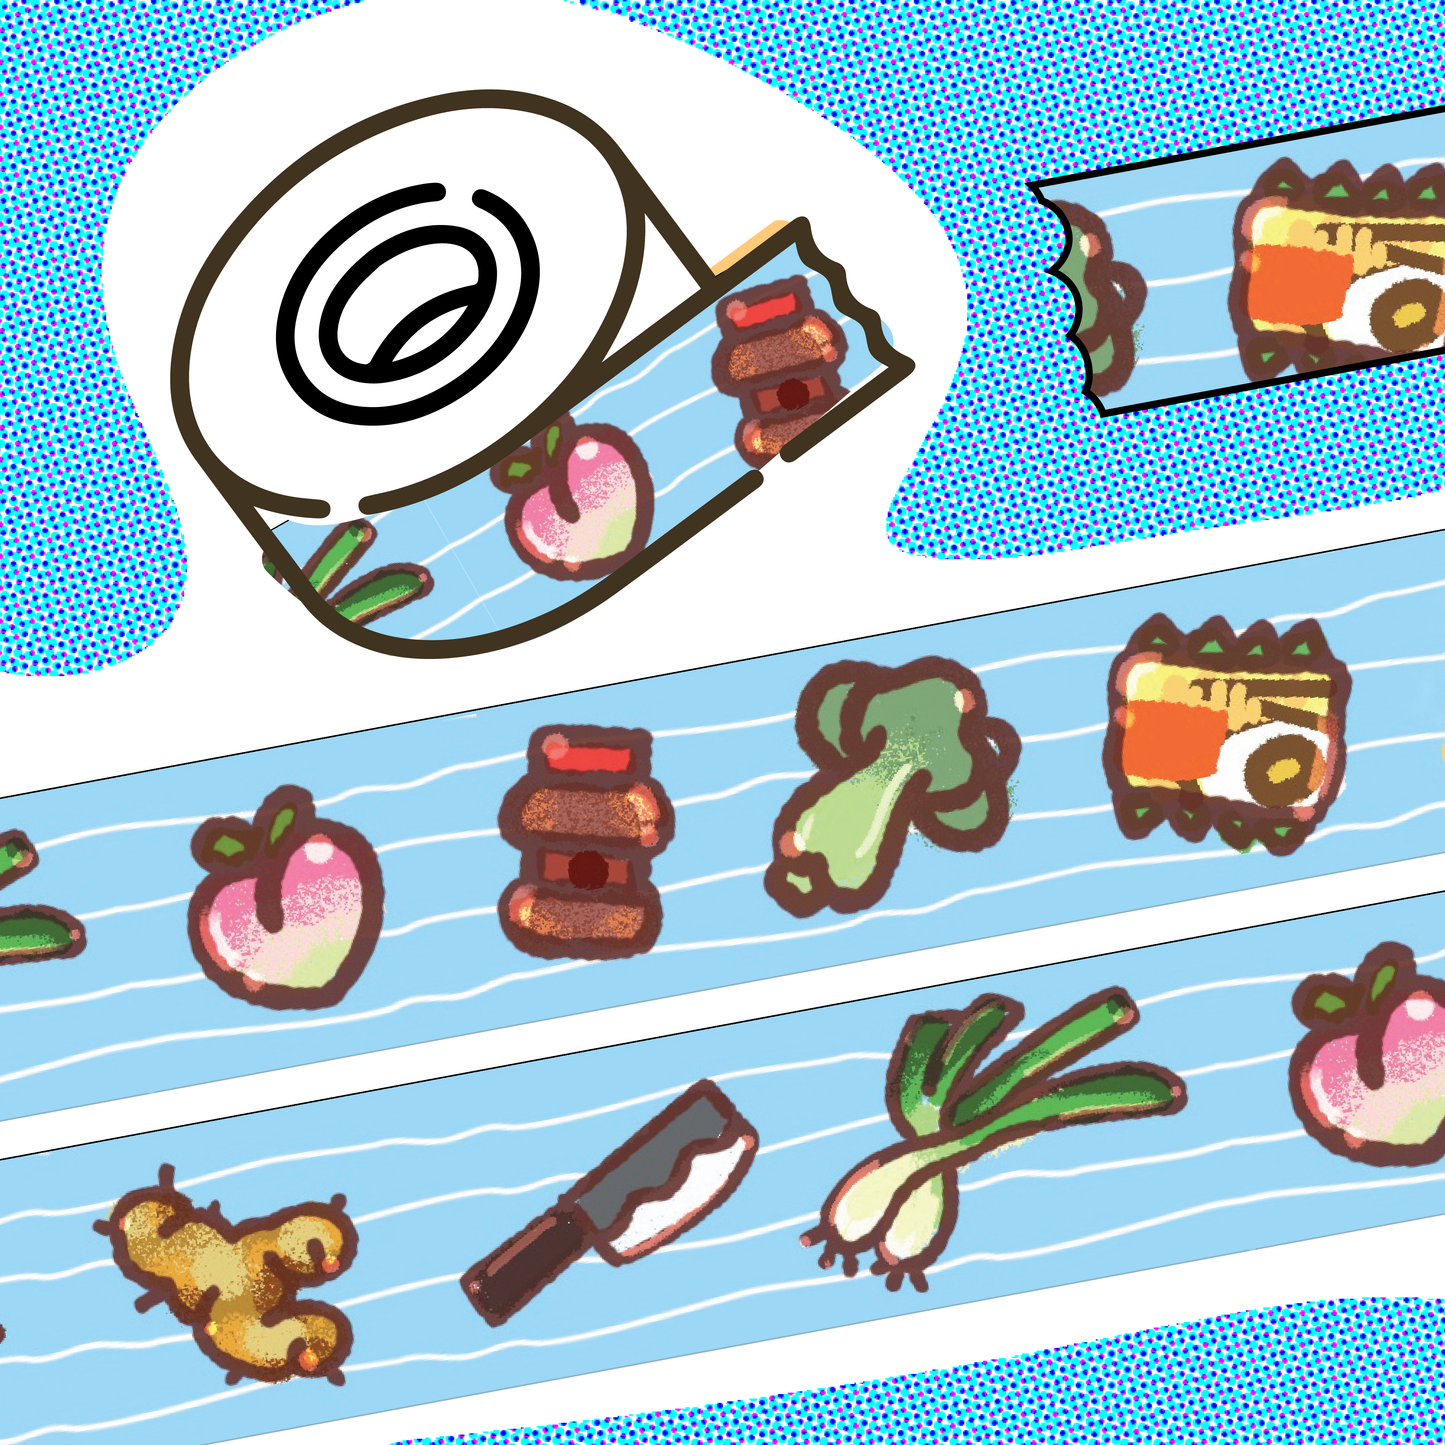 Asian Grocery Washi Tape - 15mm